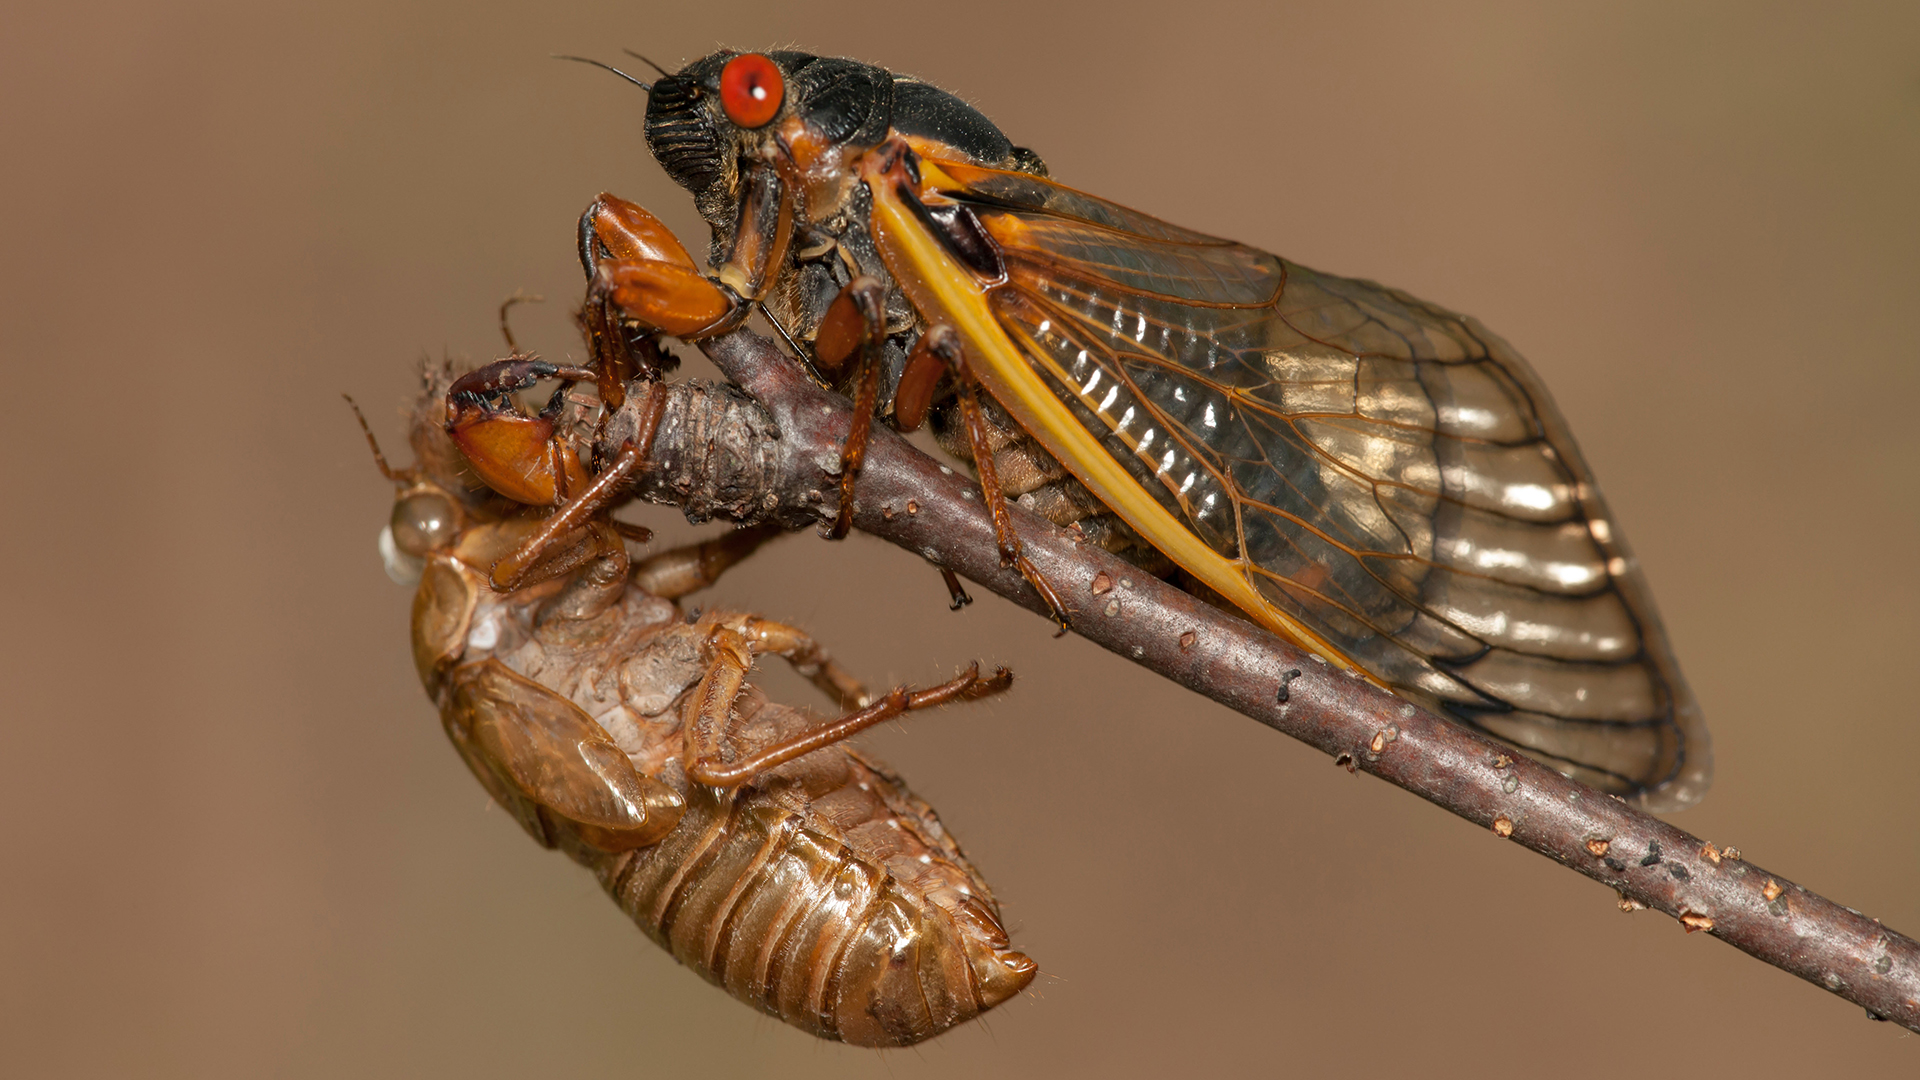 Finding those delightful Brood X cicadas Here's how